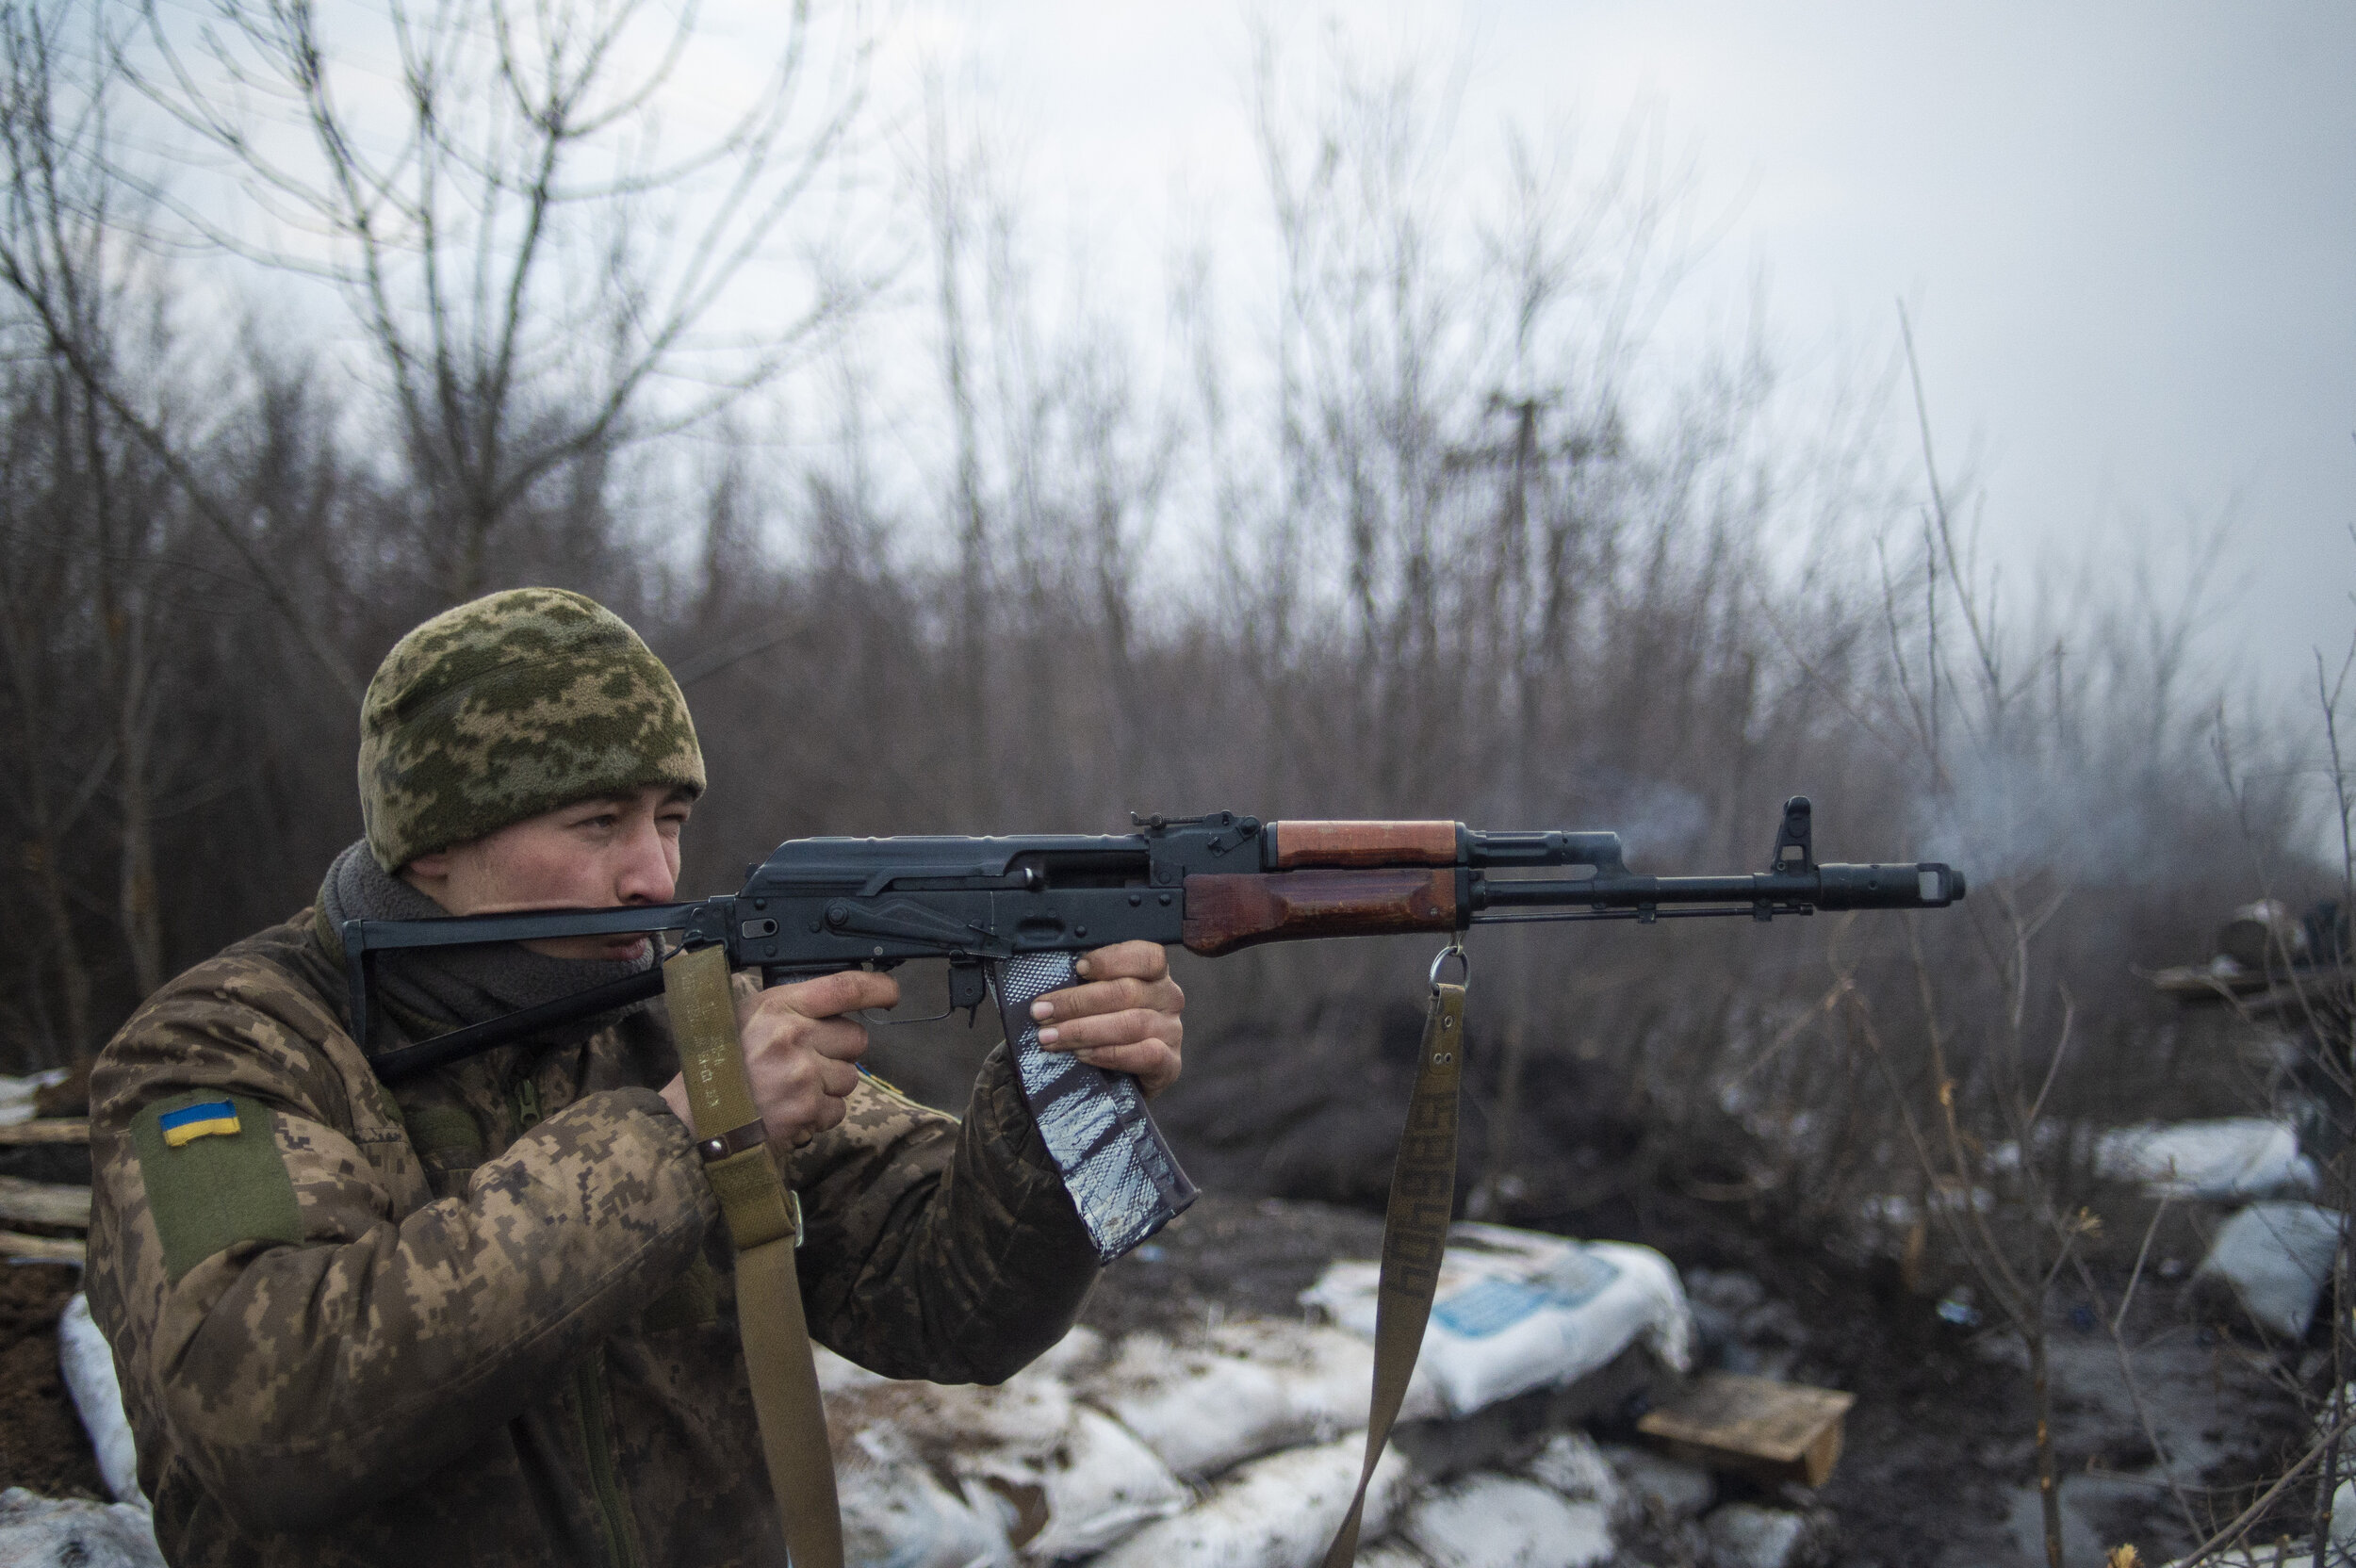  A Ukrainian soldier fires his rifle on the frontline position of ‘Point Zero’ in Zolote-4 after a night of sporadic mortar shelling on Ukrainian military positions on February 29, 2019. ‘Good morning’ shots are a staple of frontline life, both sides